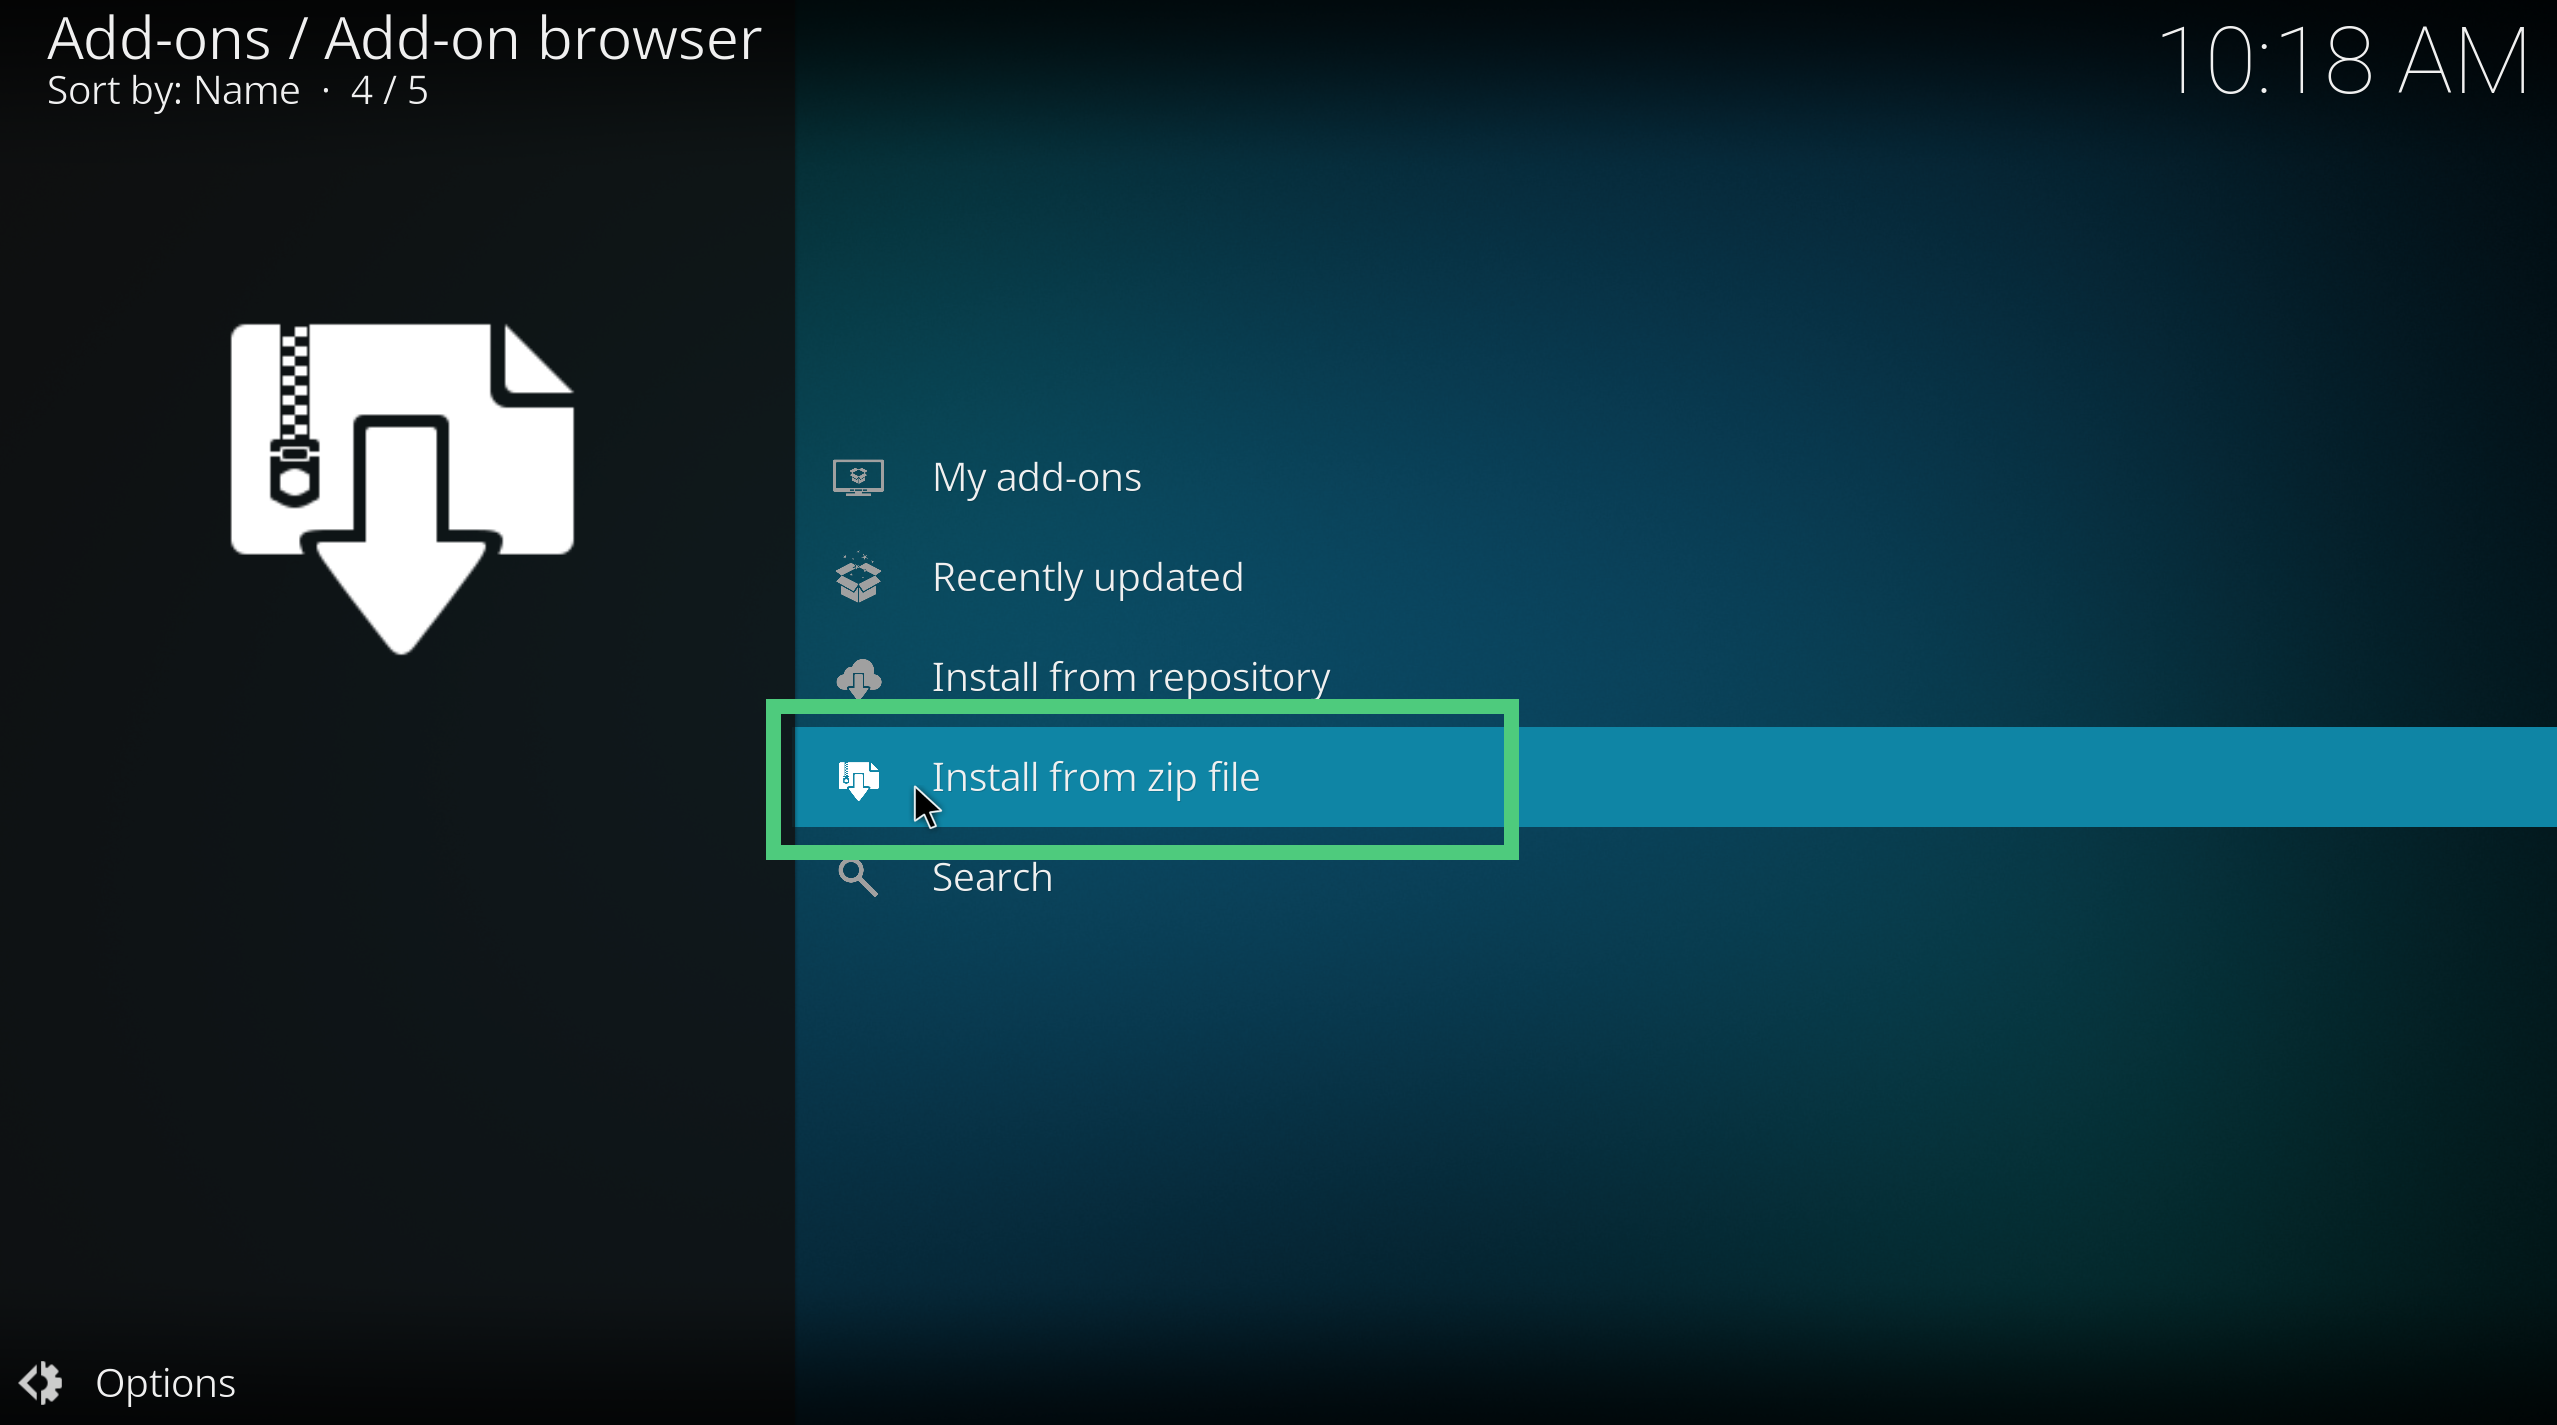 A screenshot showing how to install from zip file in kodi add-ons settings